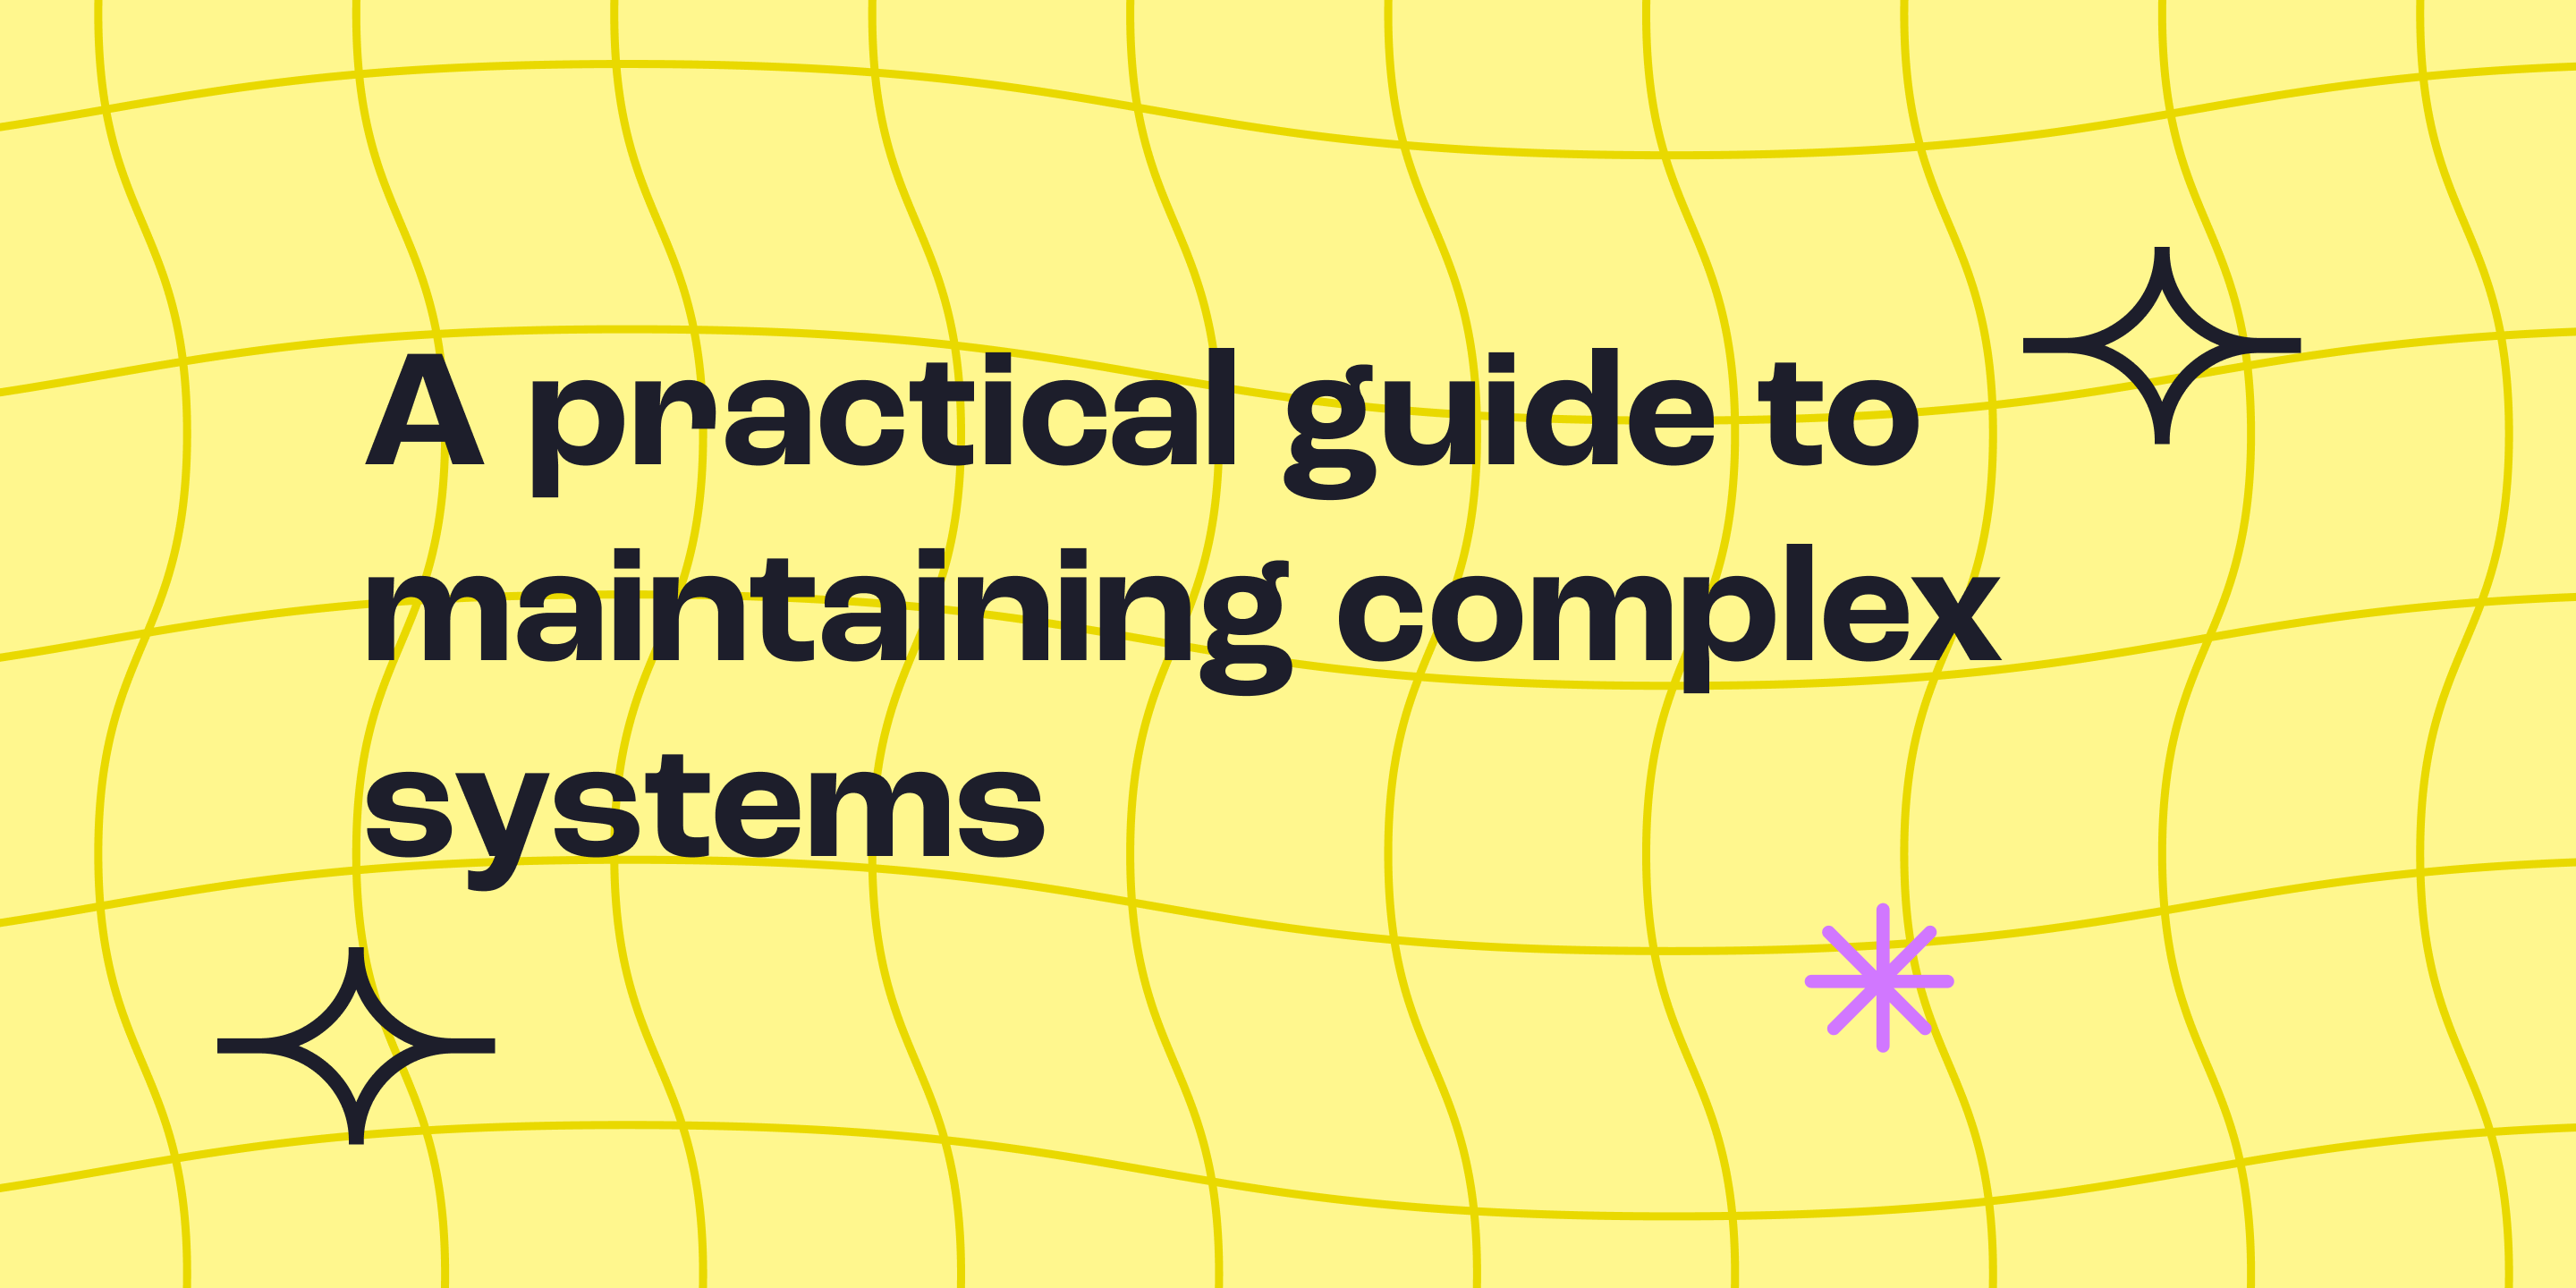 Stop chasing your tail: A practical guide to maintaining complex systems